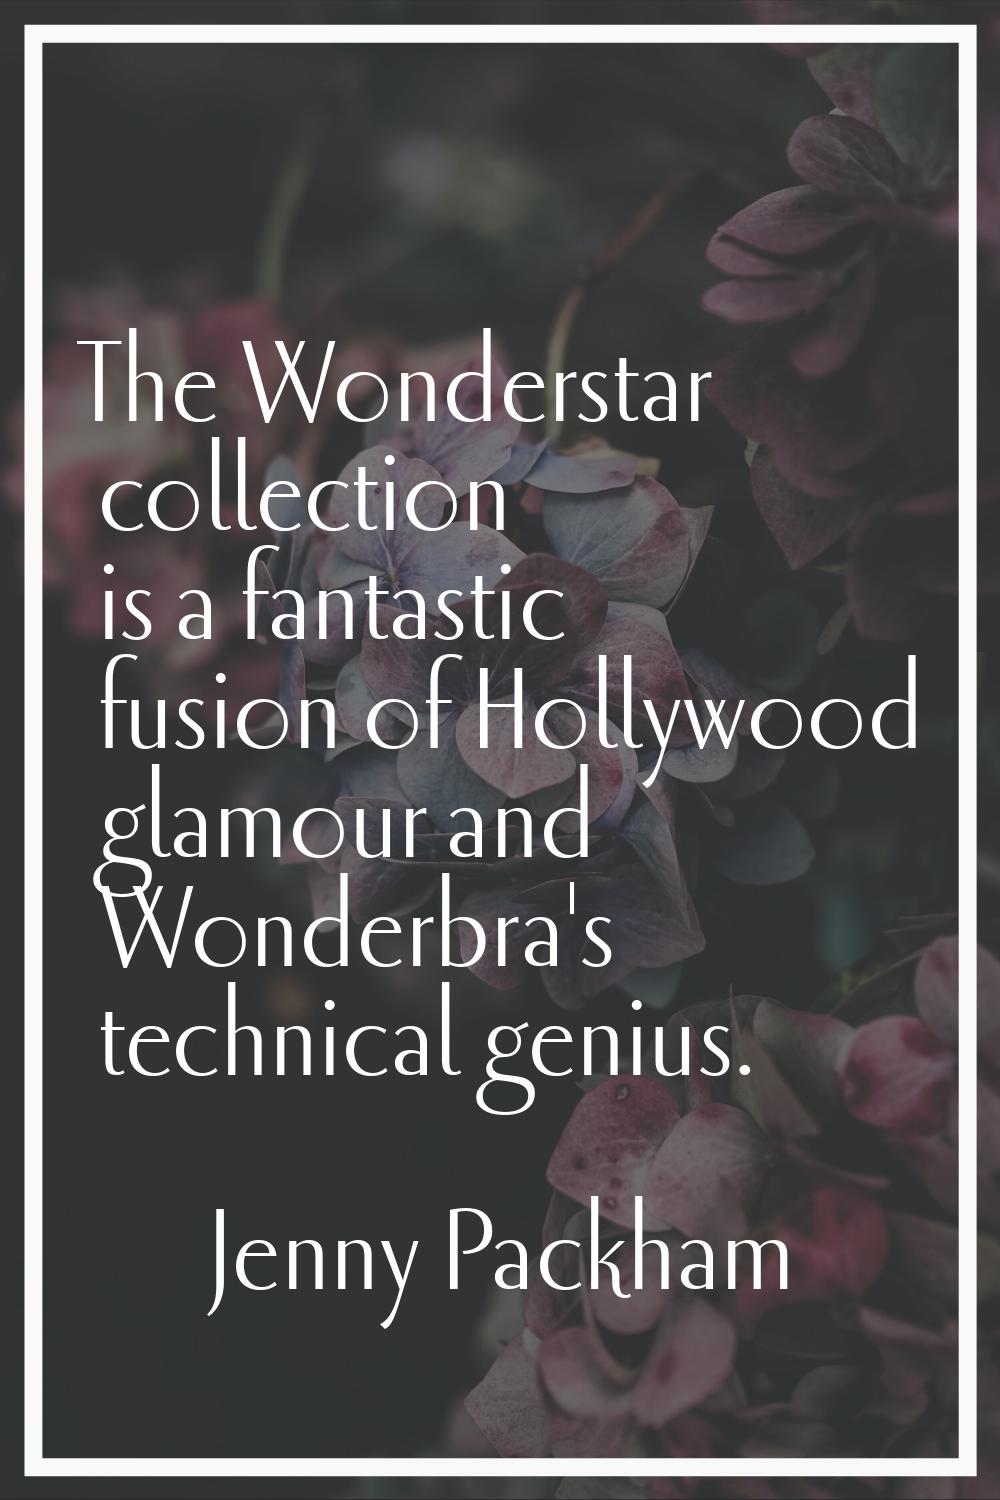 The Wonderstar collection is a fantastic fusion of Hollywood glamour and Wonderbra's technical geni